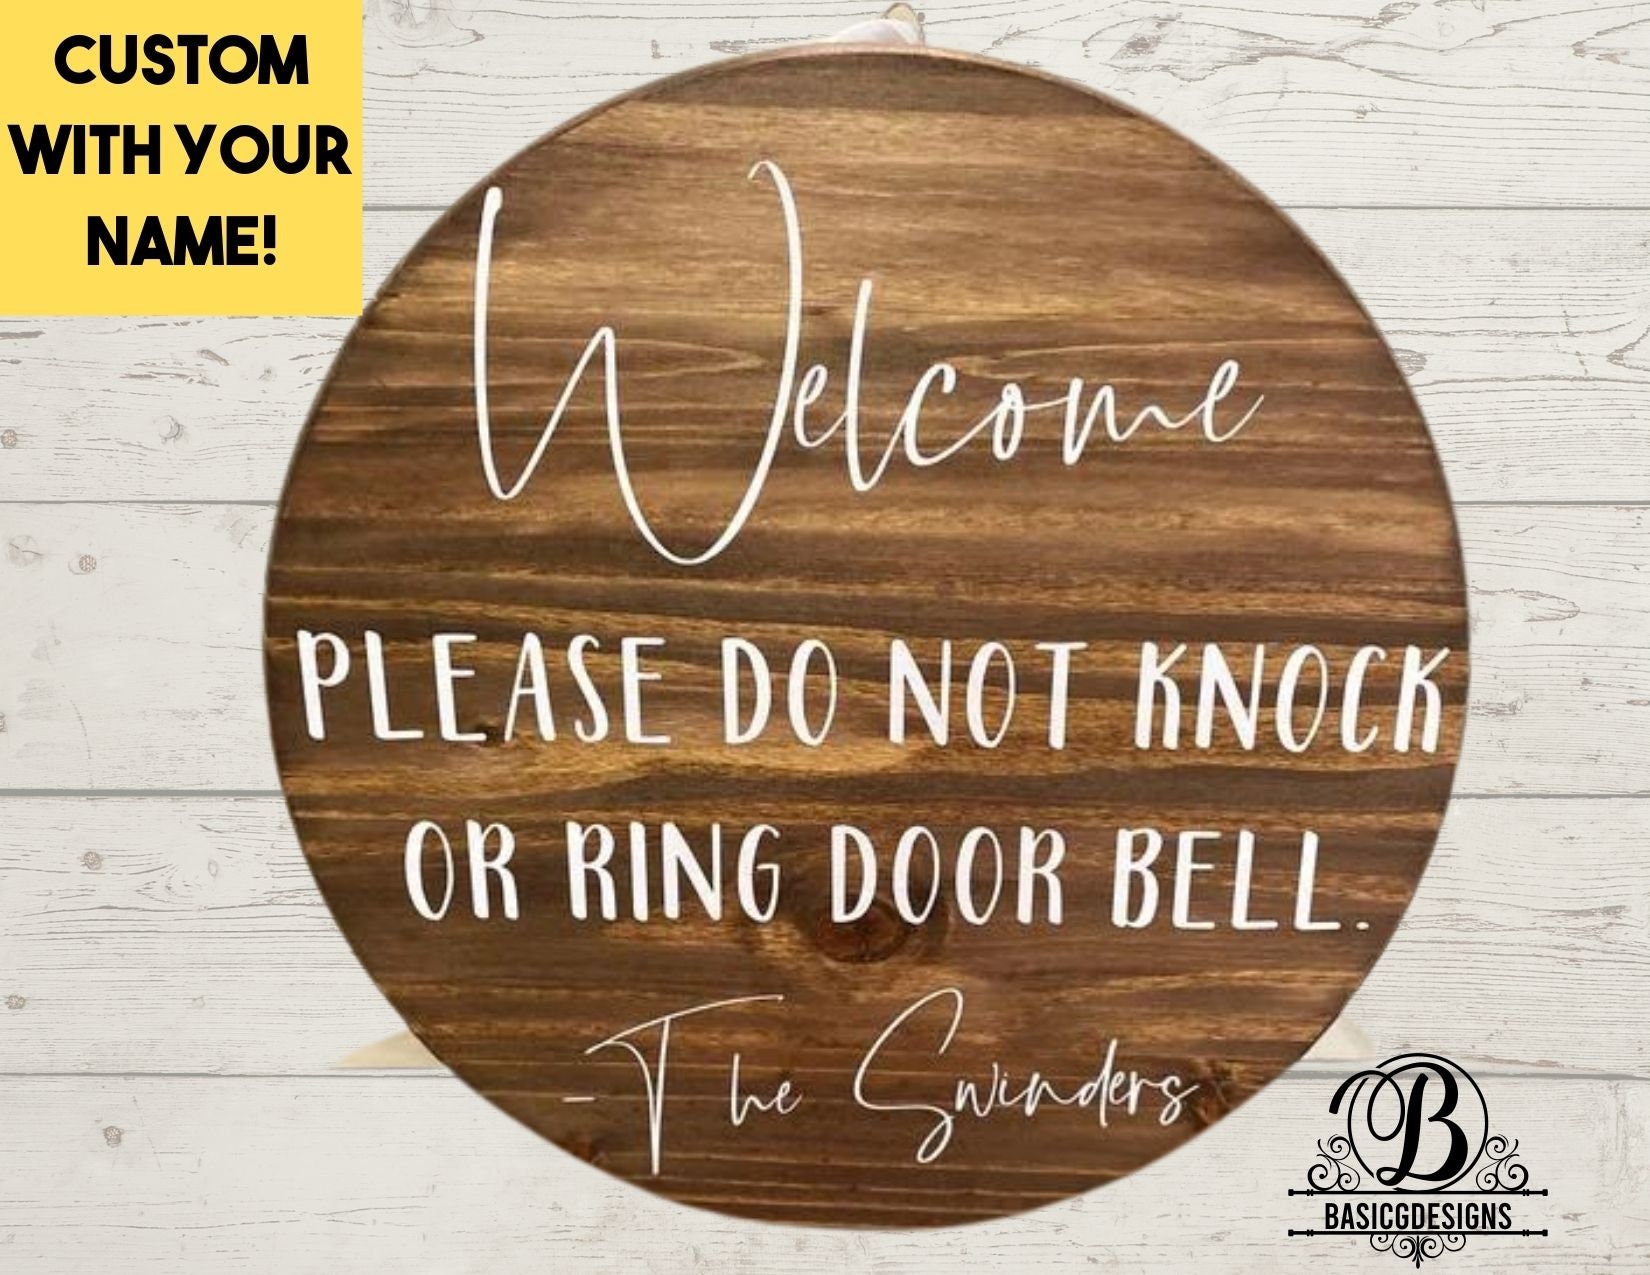 Welcome Do Not Knock or Ring Bell Themed Door Sign With Last 